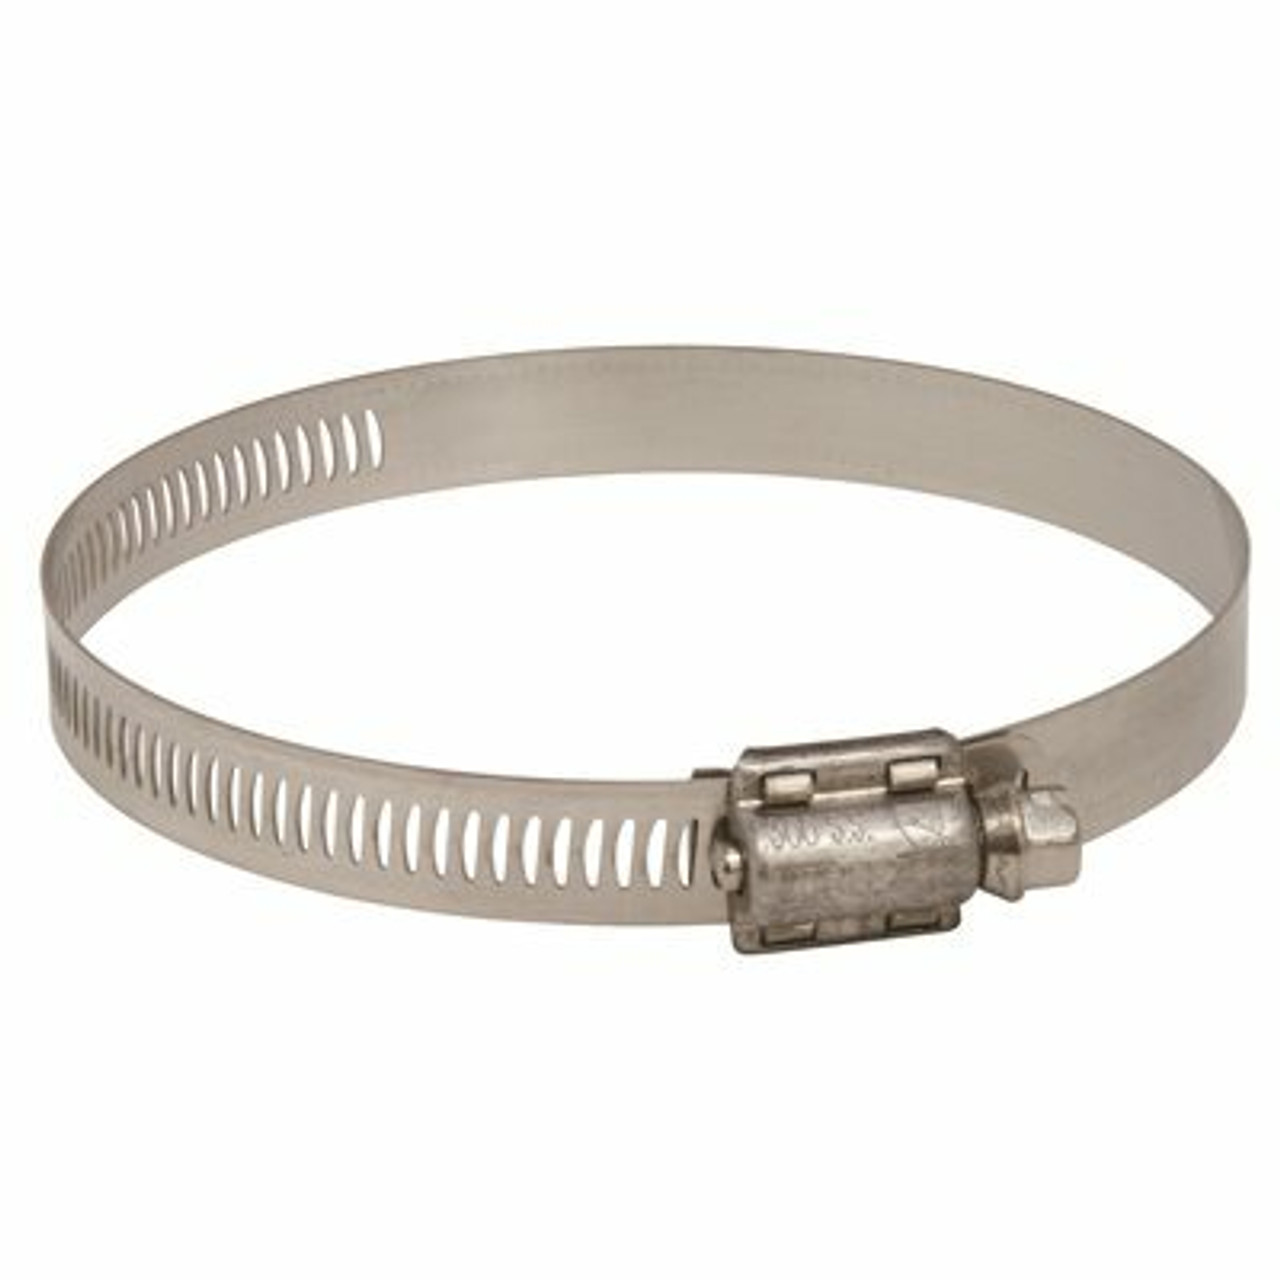 Breeze Clamp Breeze Marine Grade Hose Clamp, Stainless Steel, 3-5/16 In. To 4-1/4 In., Pack Of 10